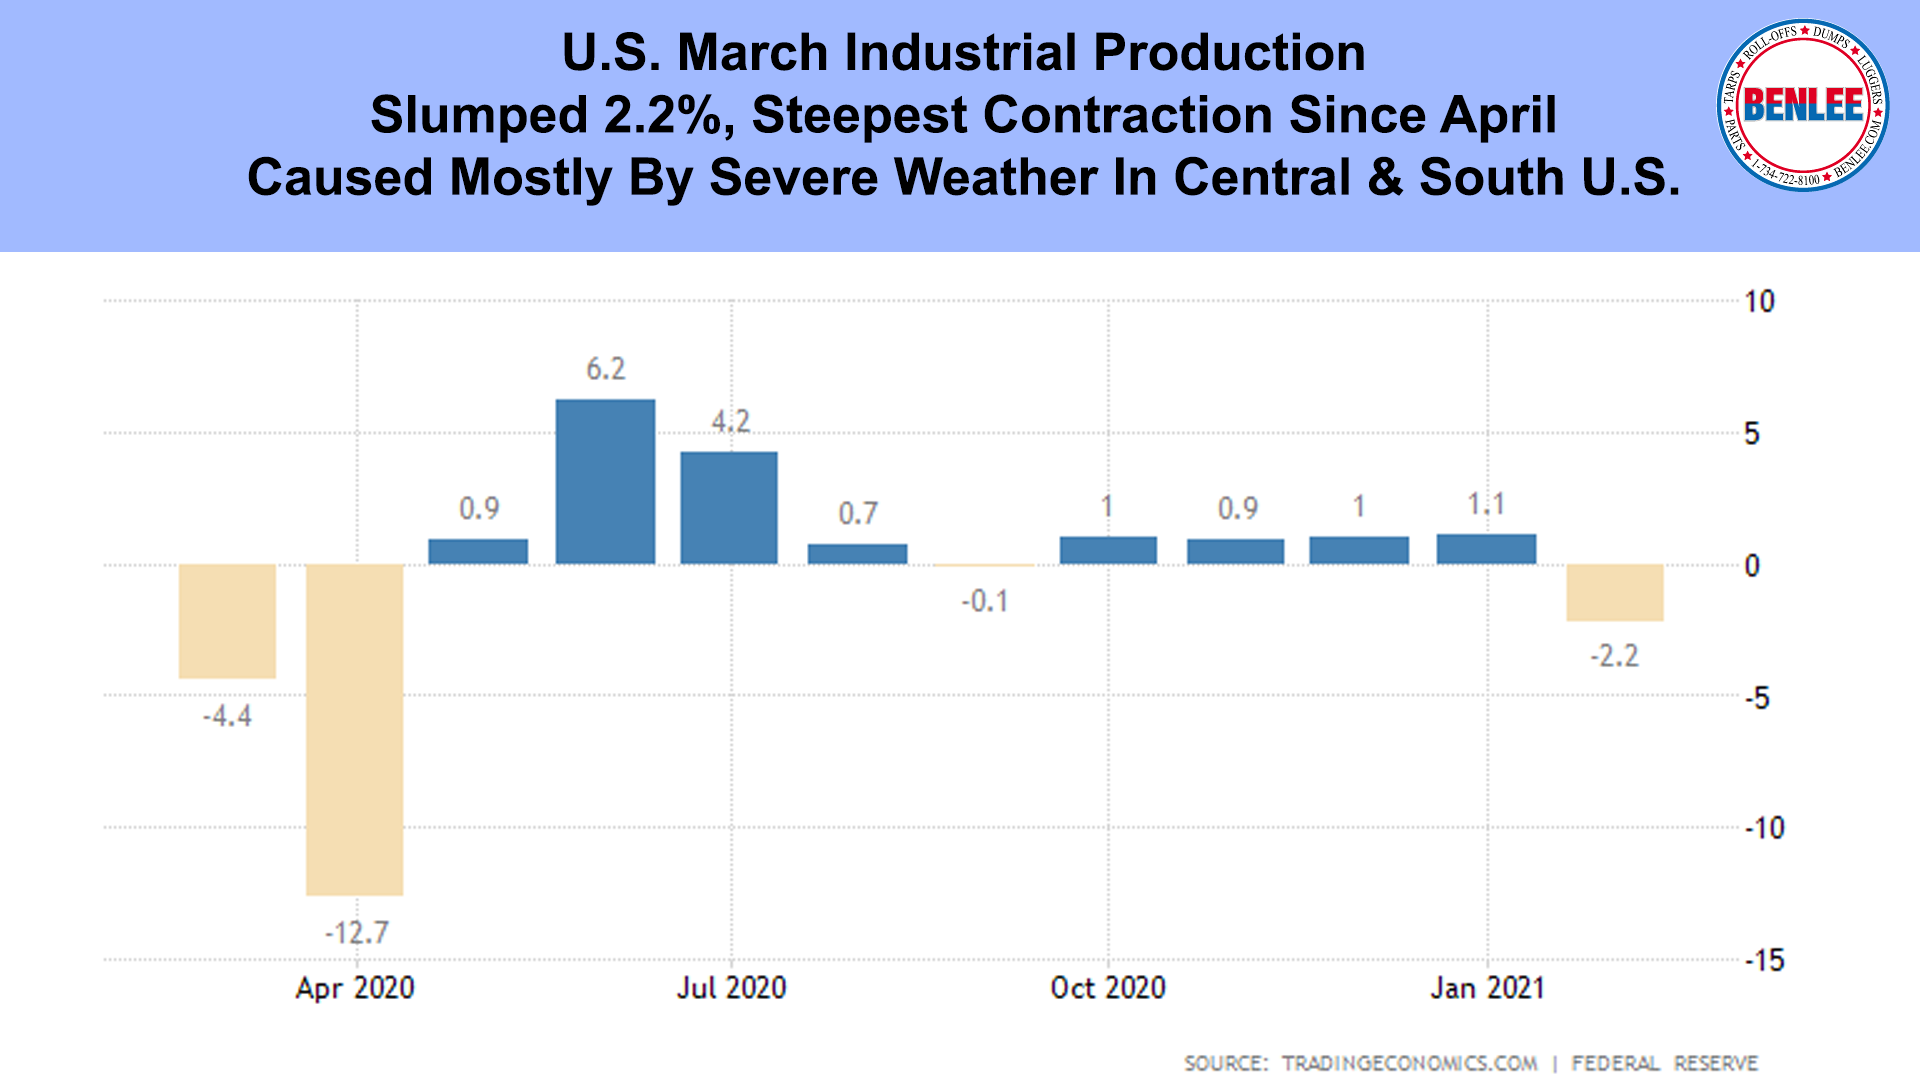 U.S. March Industrial Production